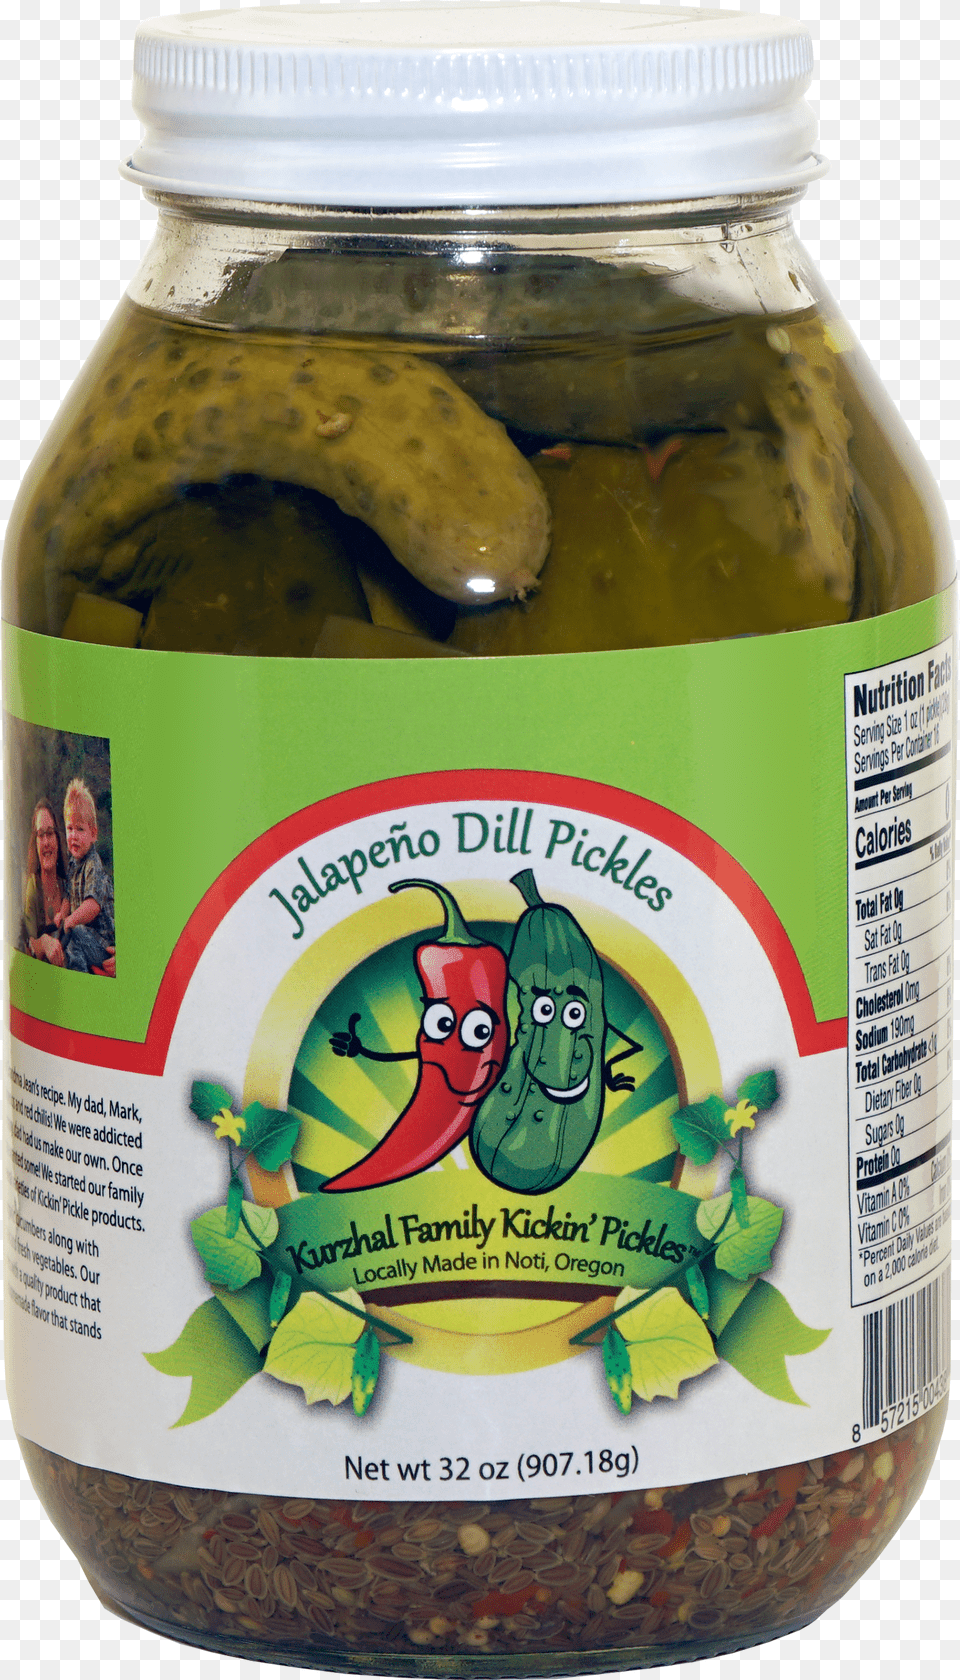 Kurzhal Family Kickin Pickles Pickled Cucumber Png